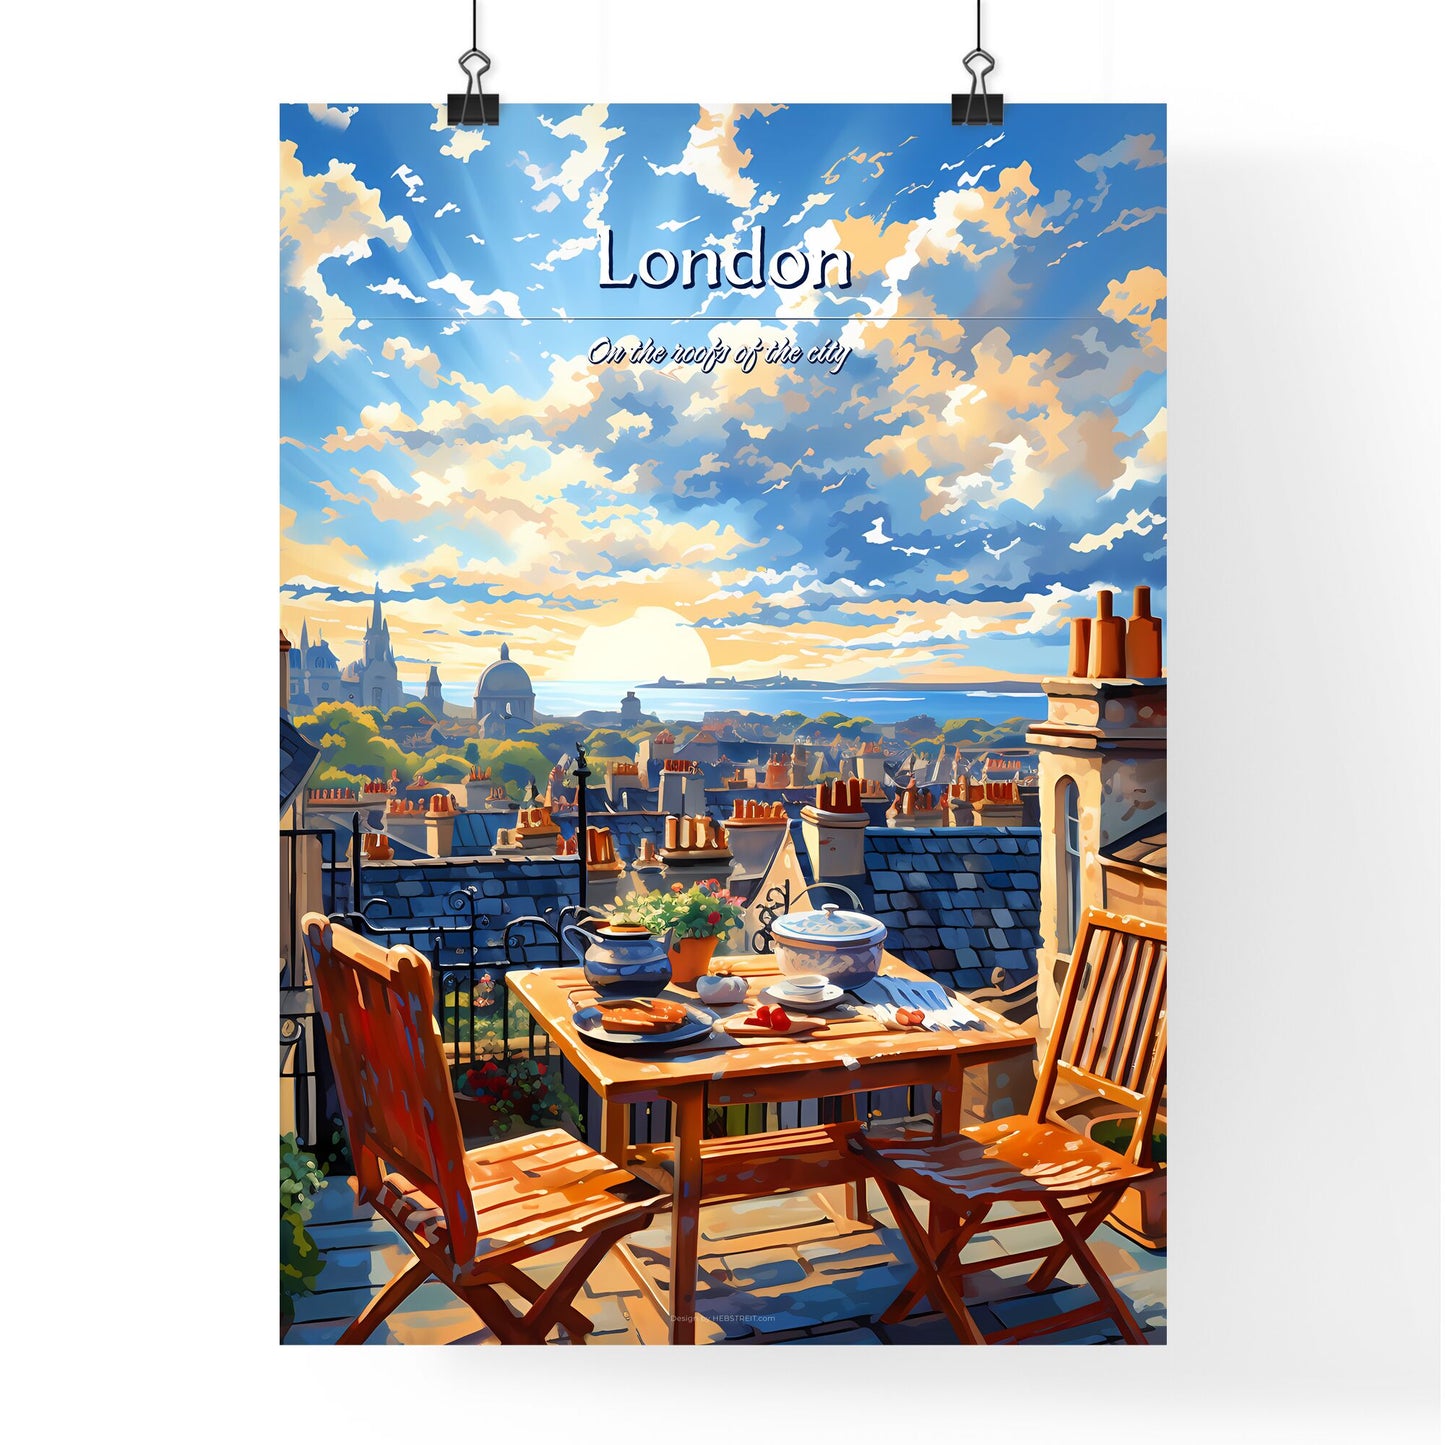 On the roofs of London, UK - Art print of a table and chairs on a rooftop overlooking a city Default Title